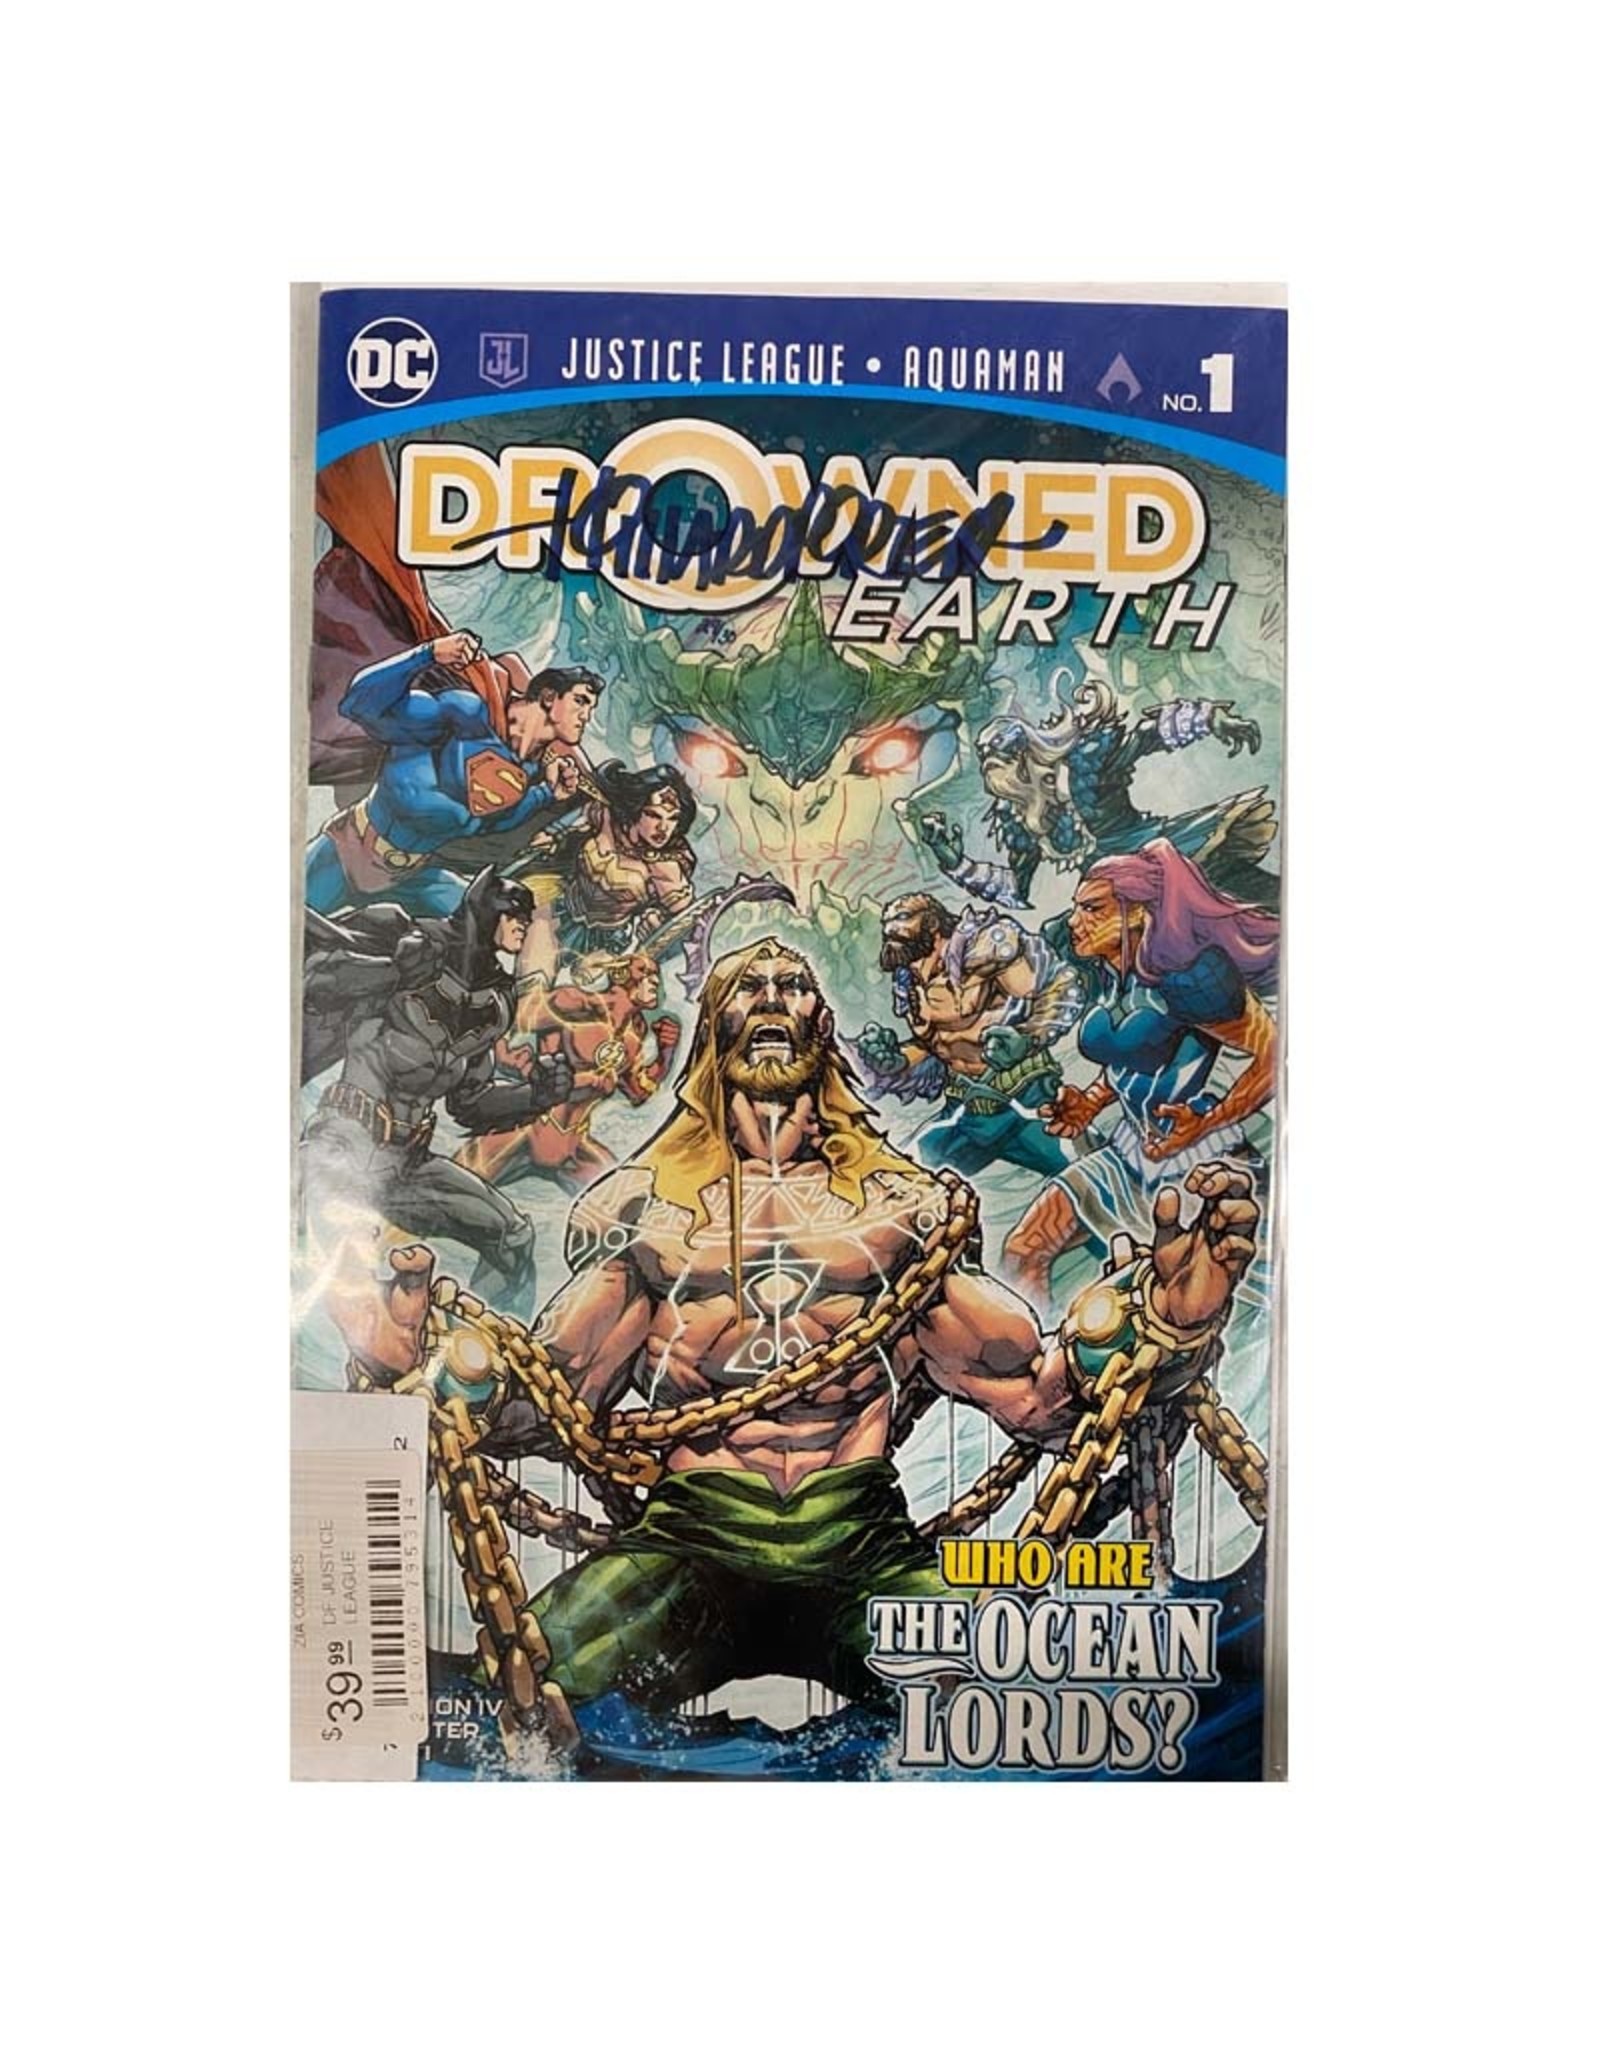 DC Comics Justice League / Aquaman Drowned Earth #1 signed by Howard Porter